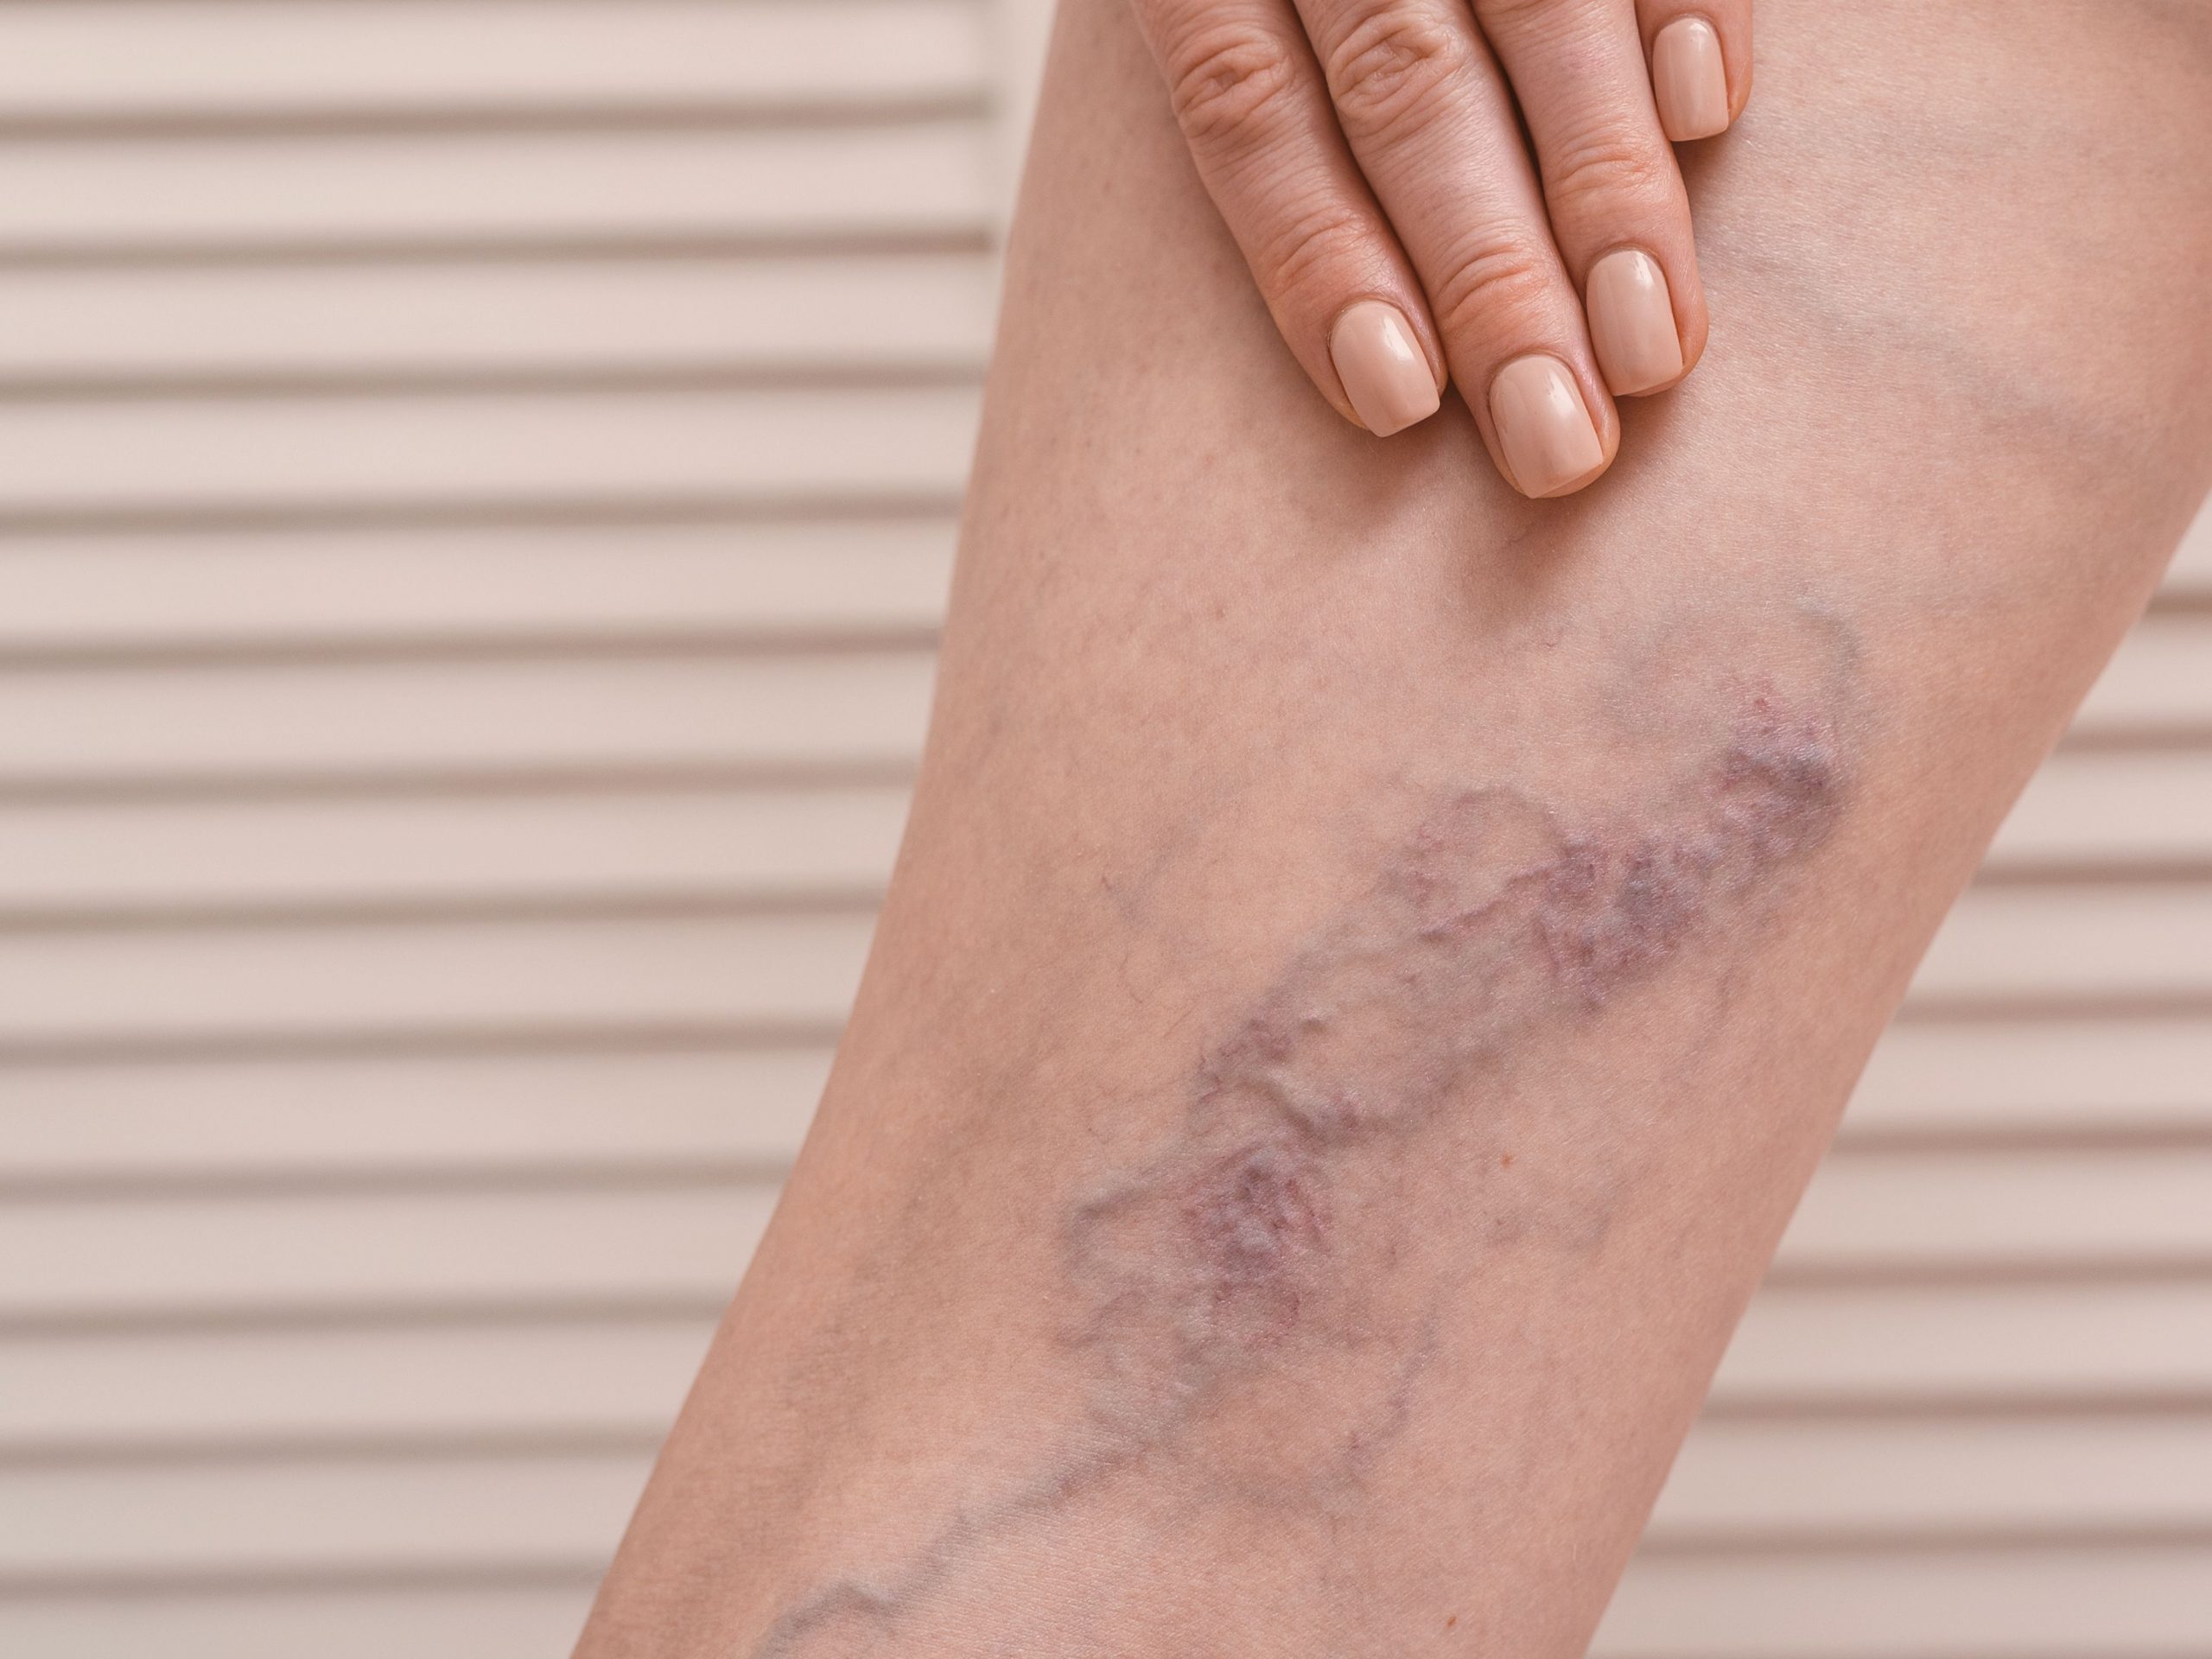 Can working from home cause DVT (Deep Vein Thrombosis)?